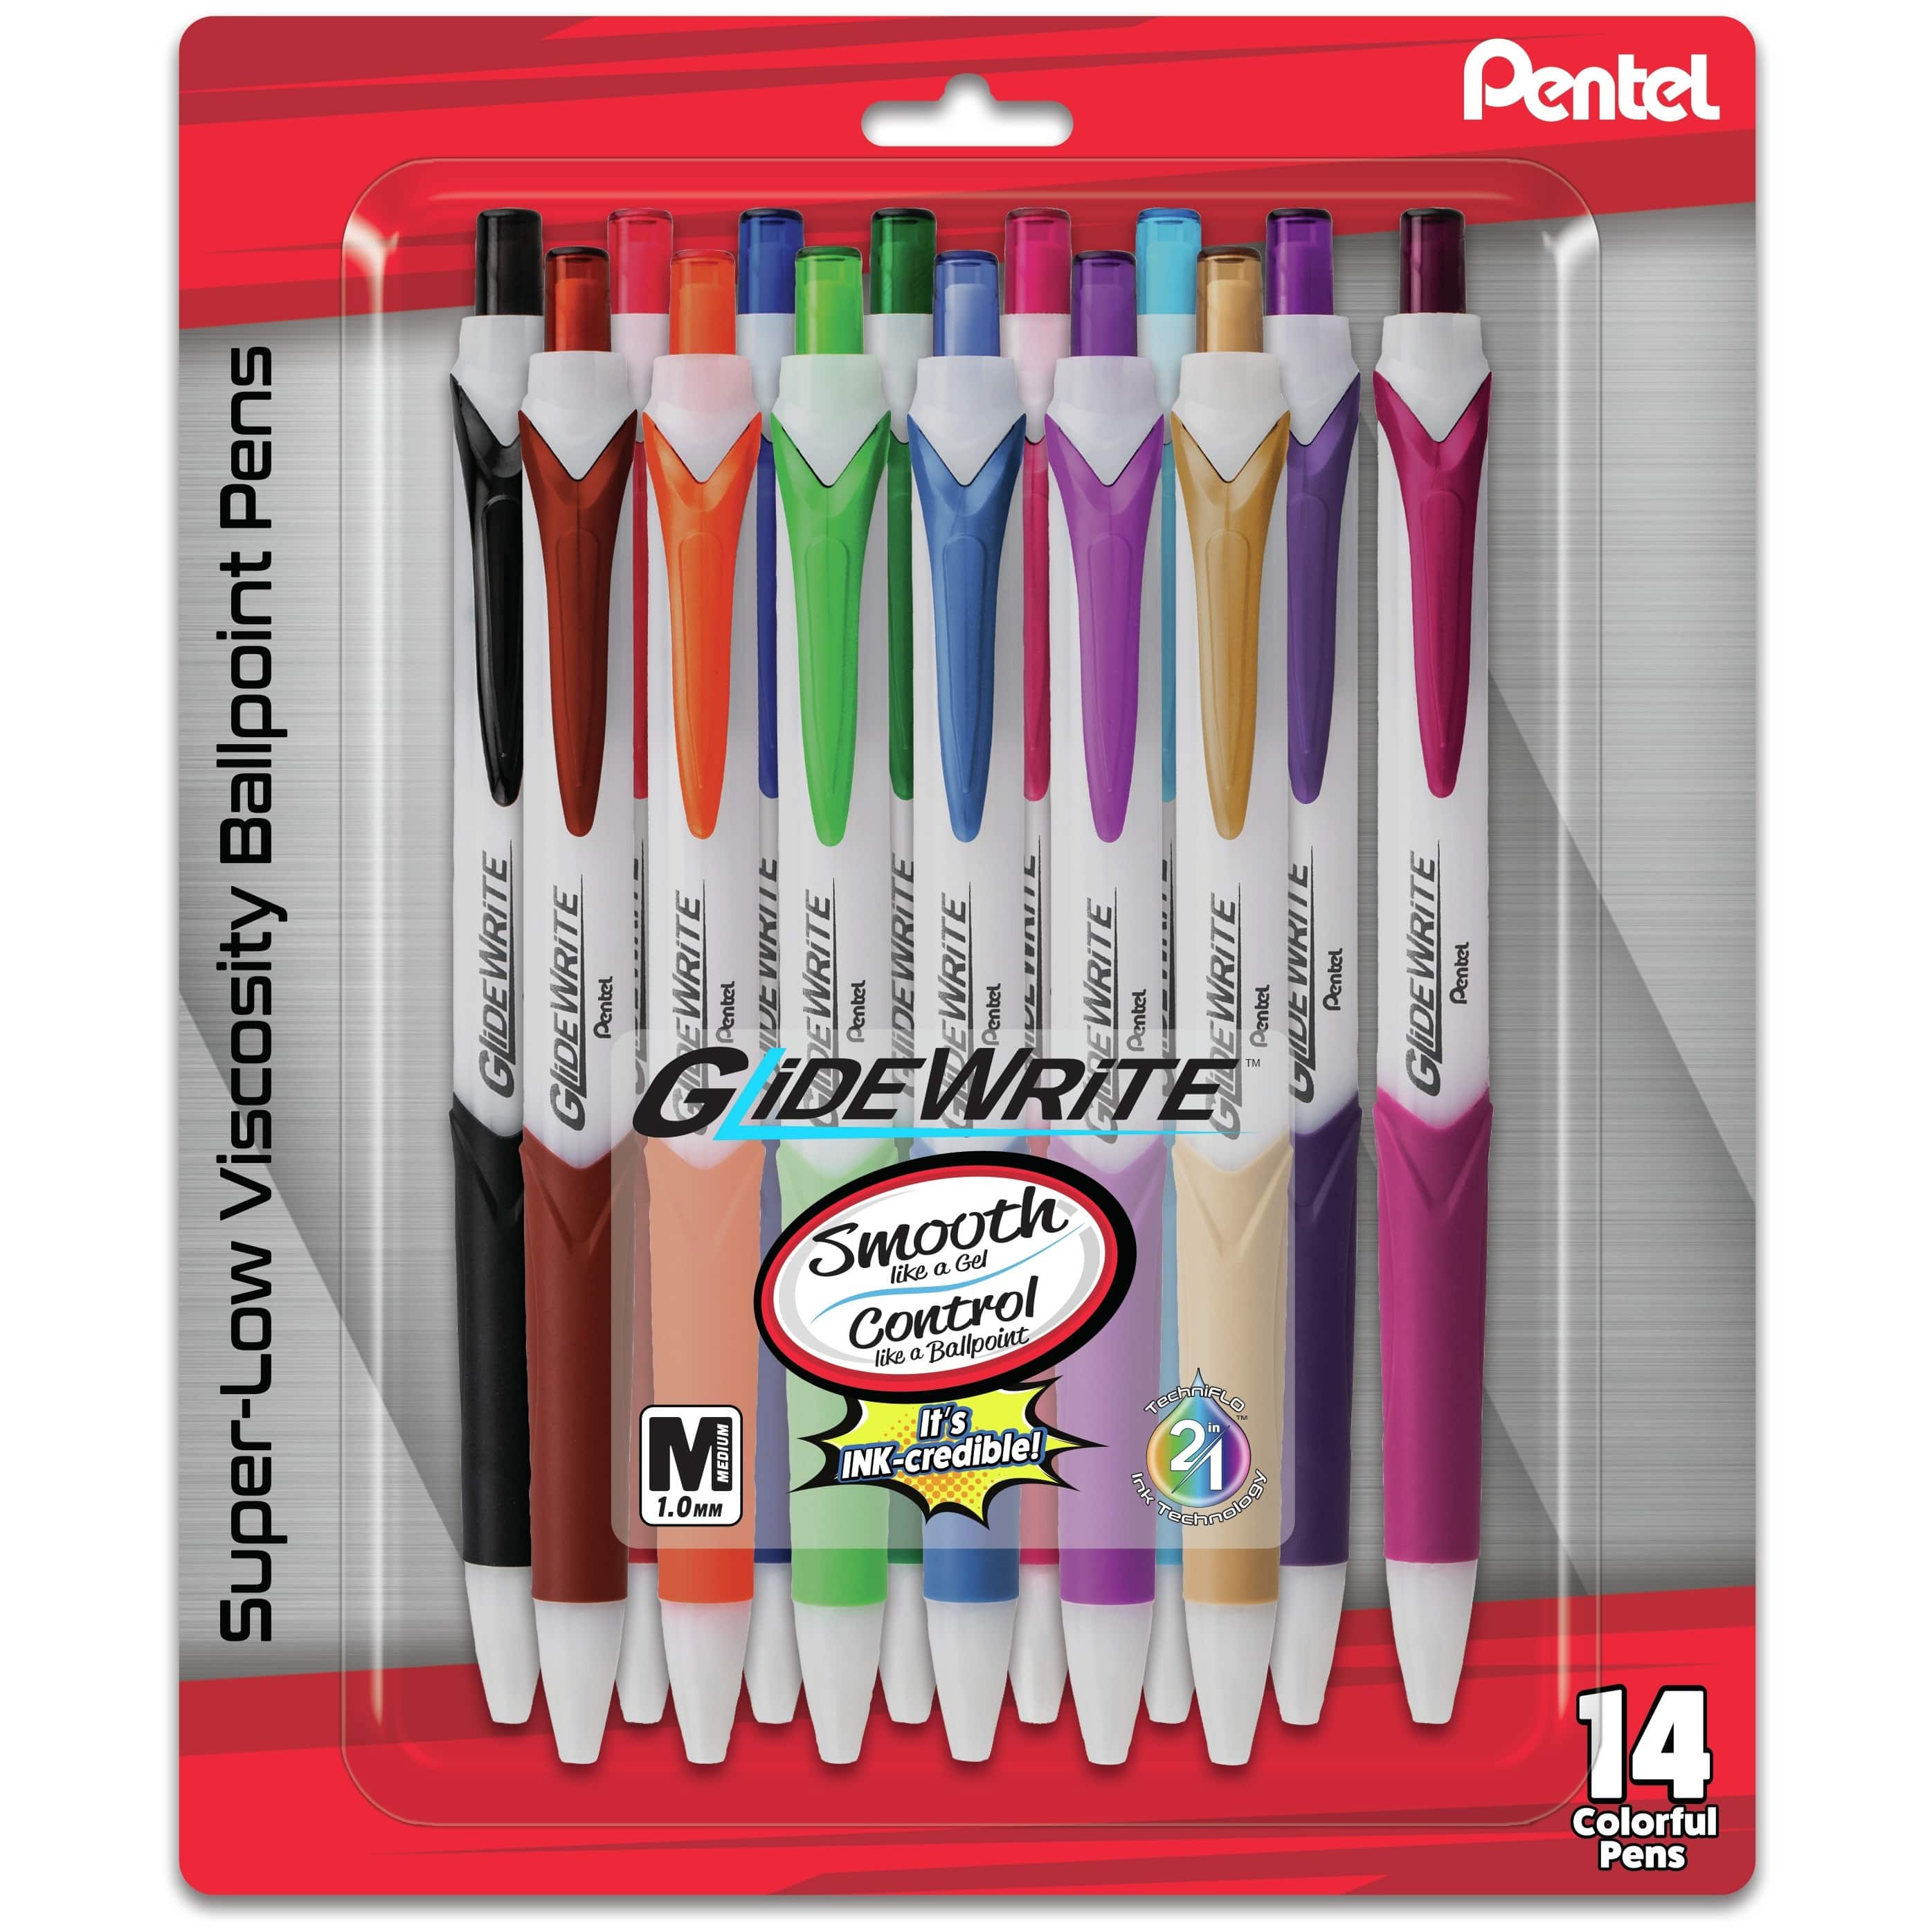 Ballpoint - STABILO pointball Red Box of 10